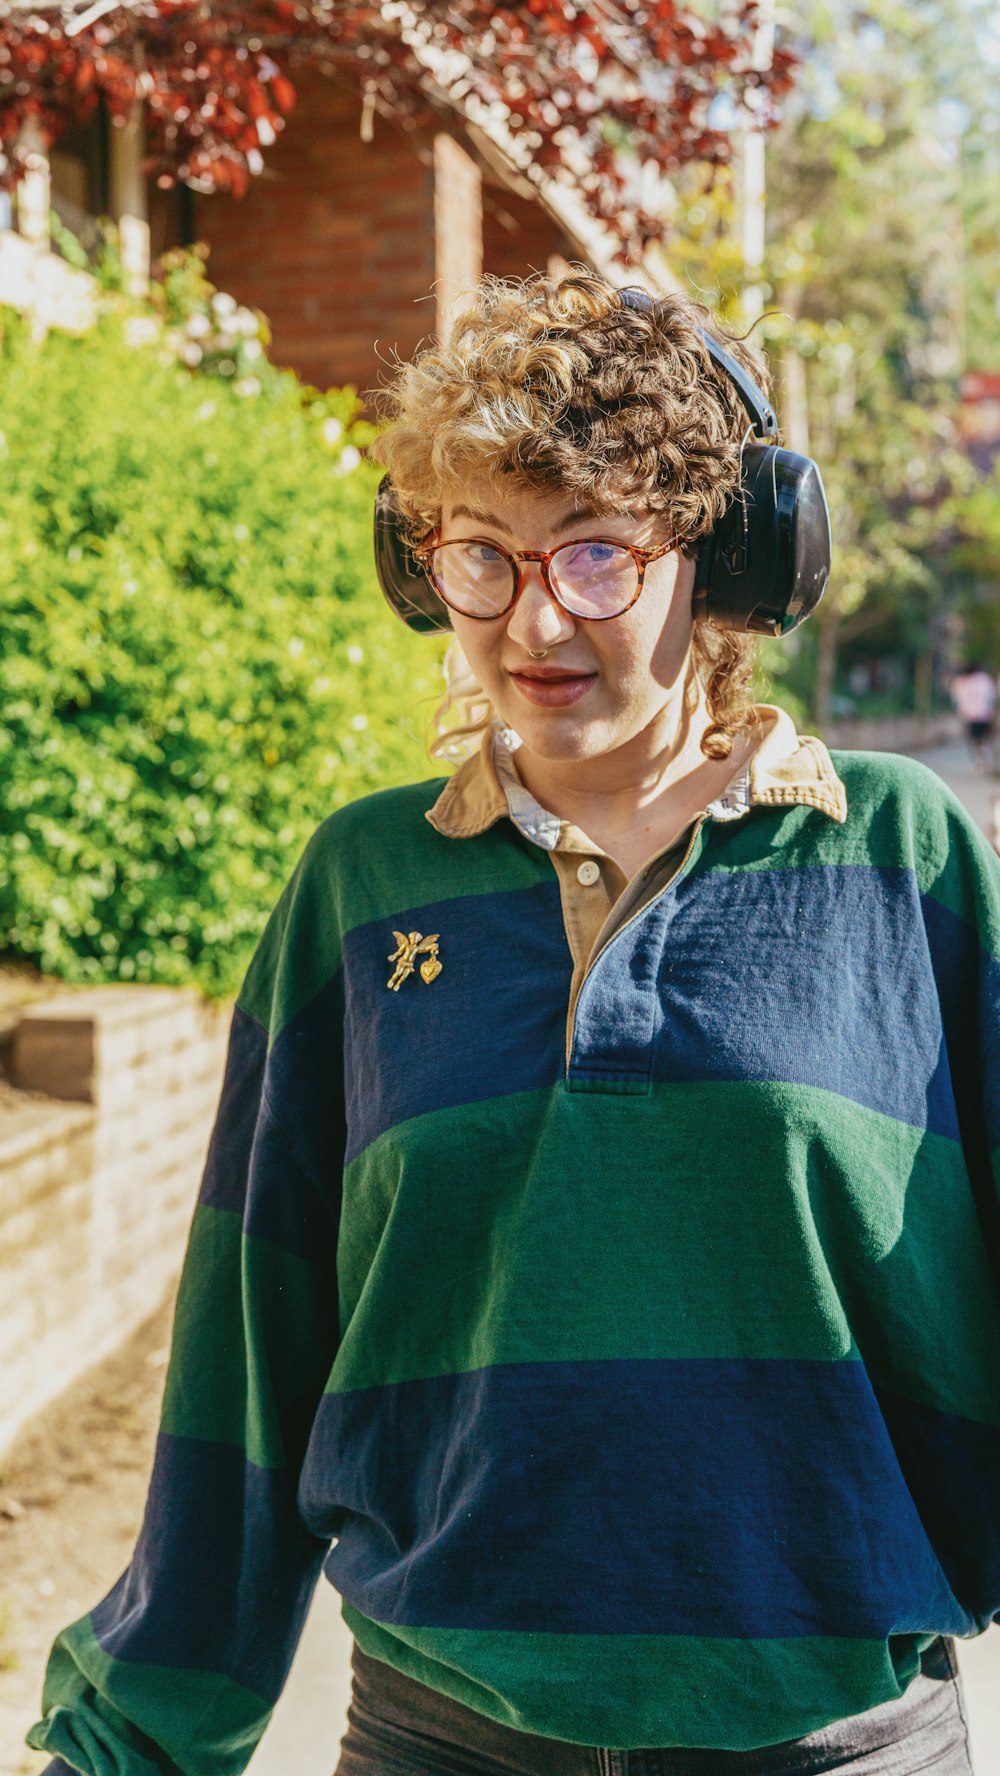 Portrait of a nonbinary autistic person outdoors using headphones